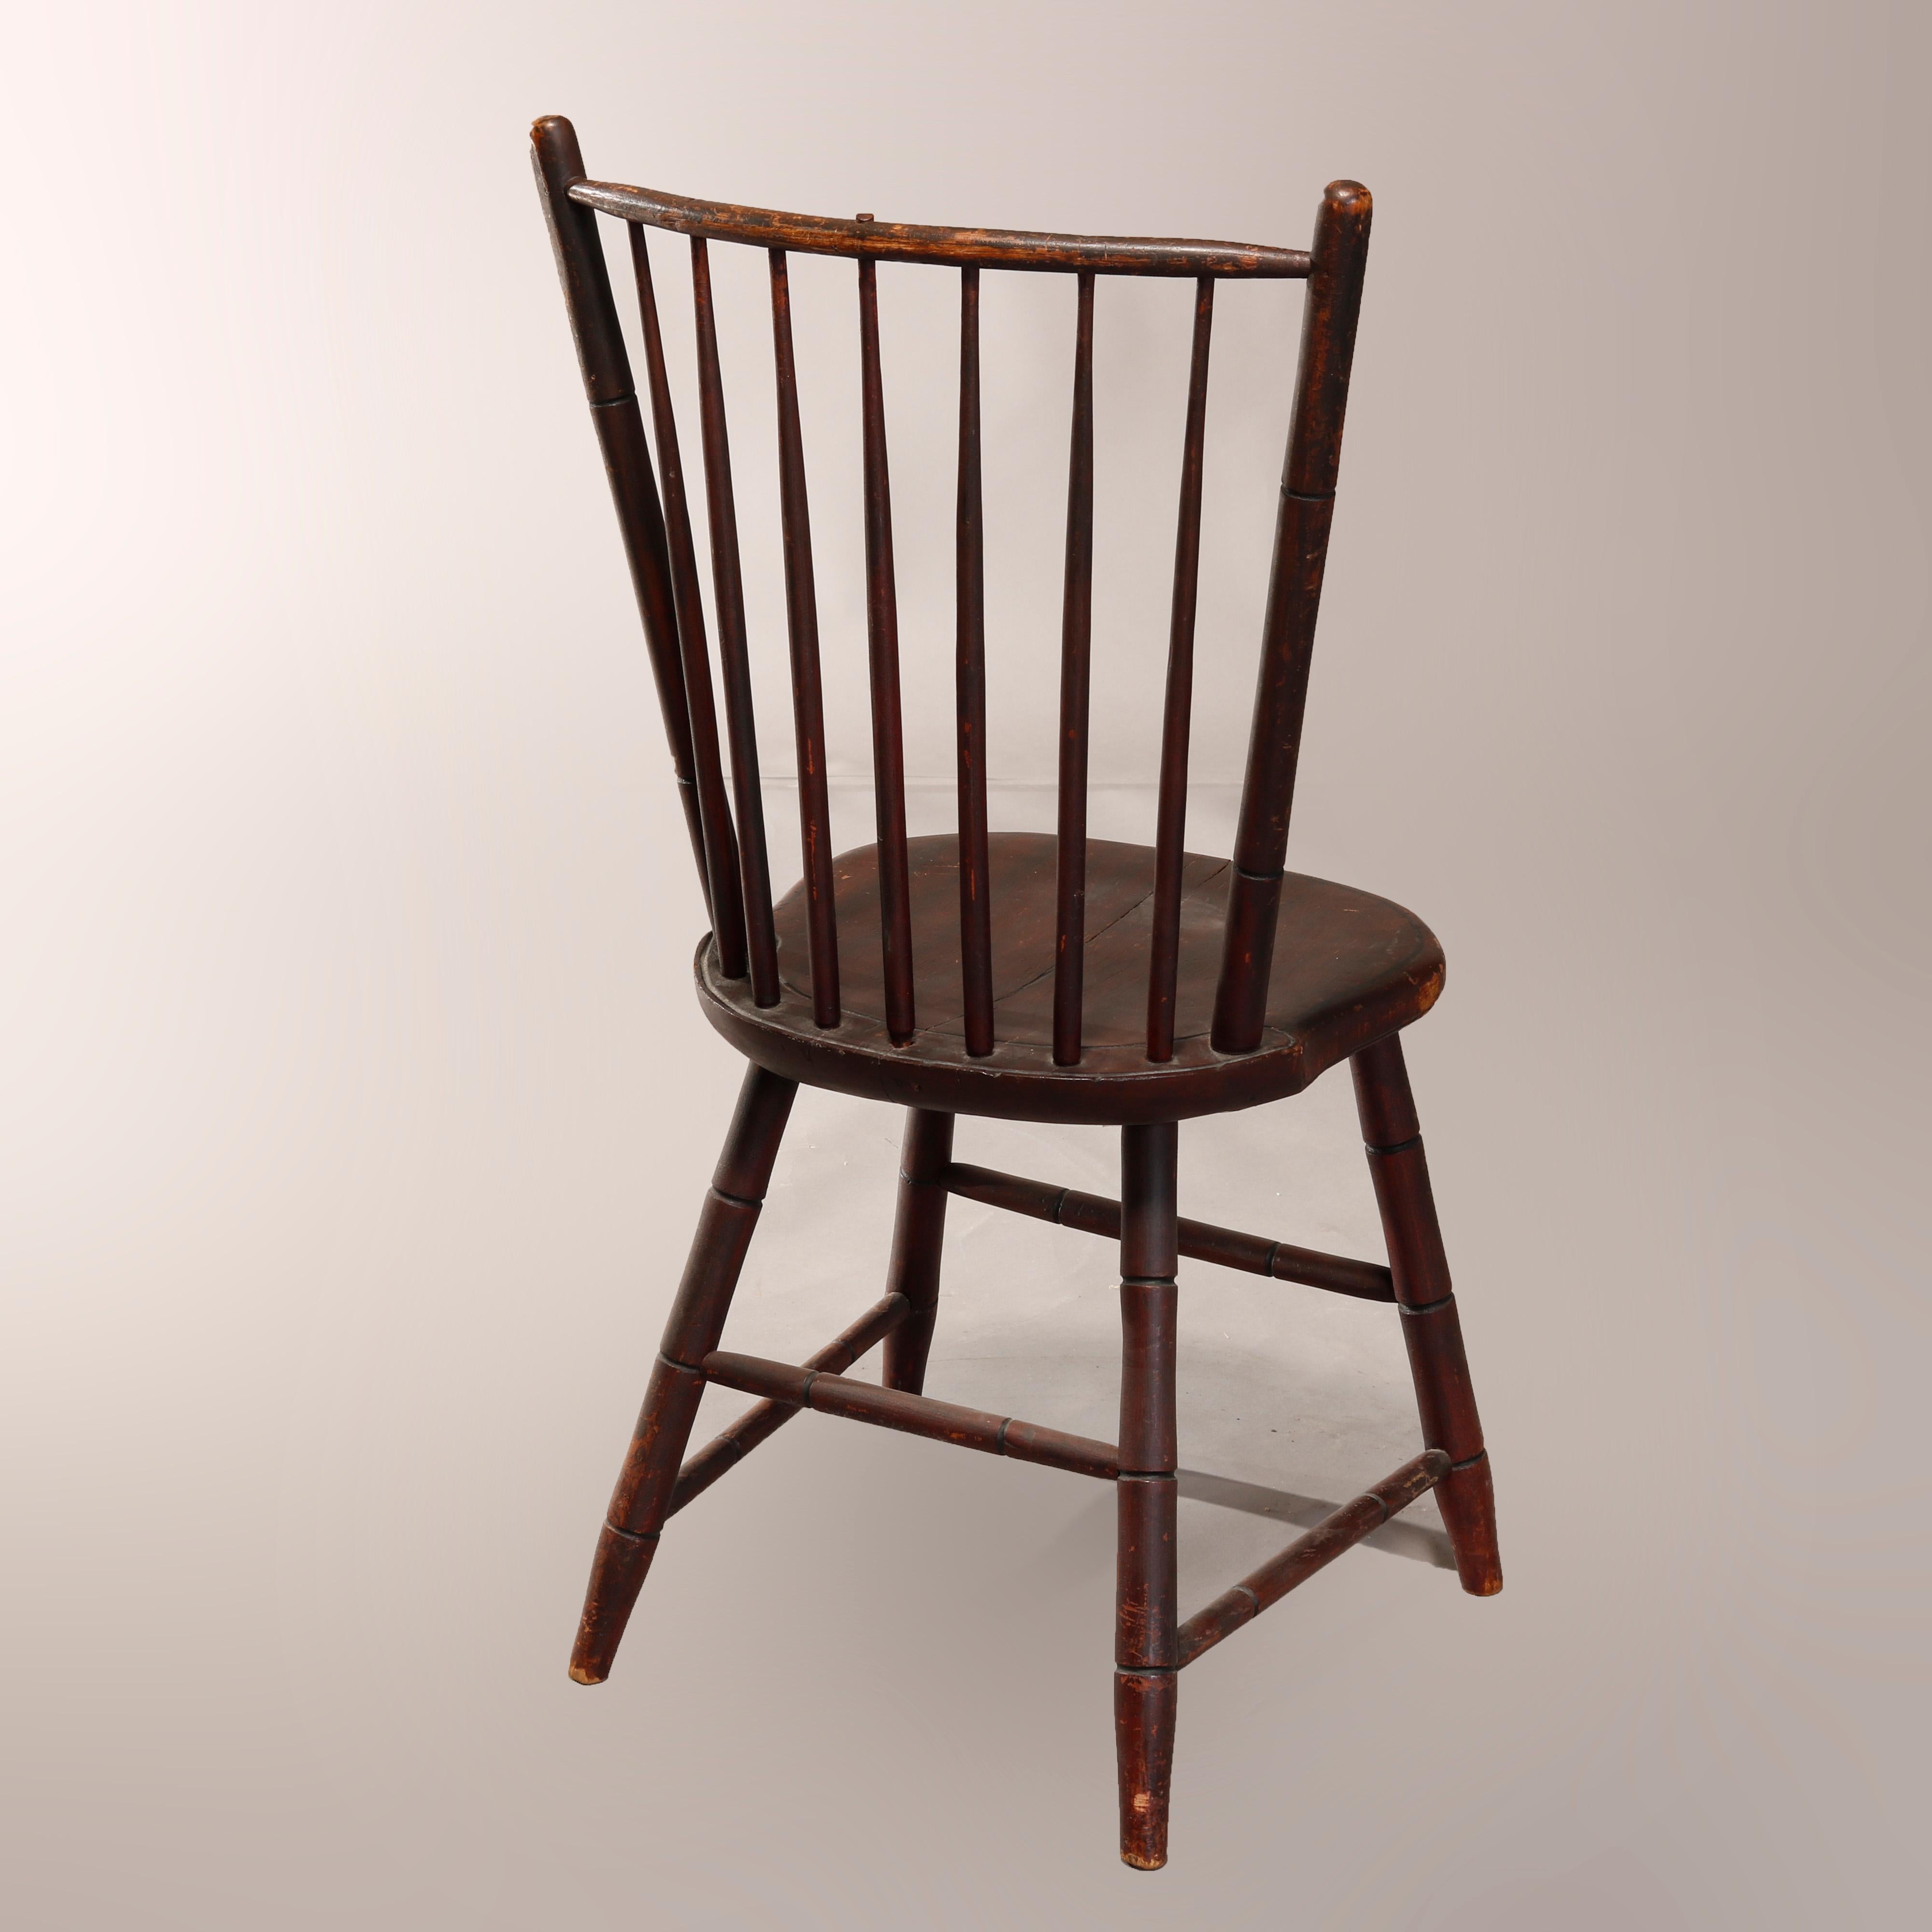 American Colonial Antique Early American Stenciled Windsor Chair, 19th Century